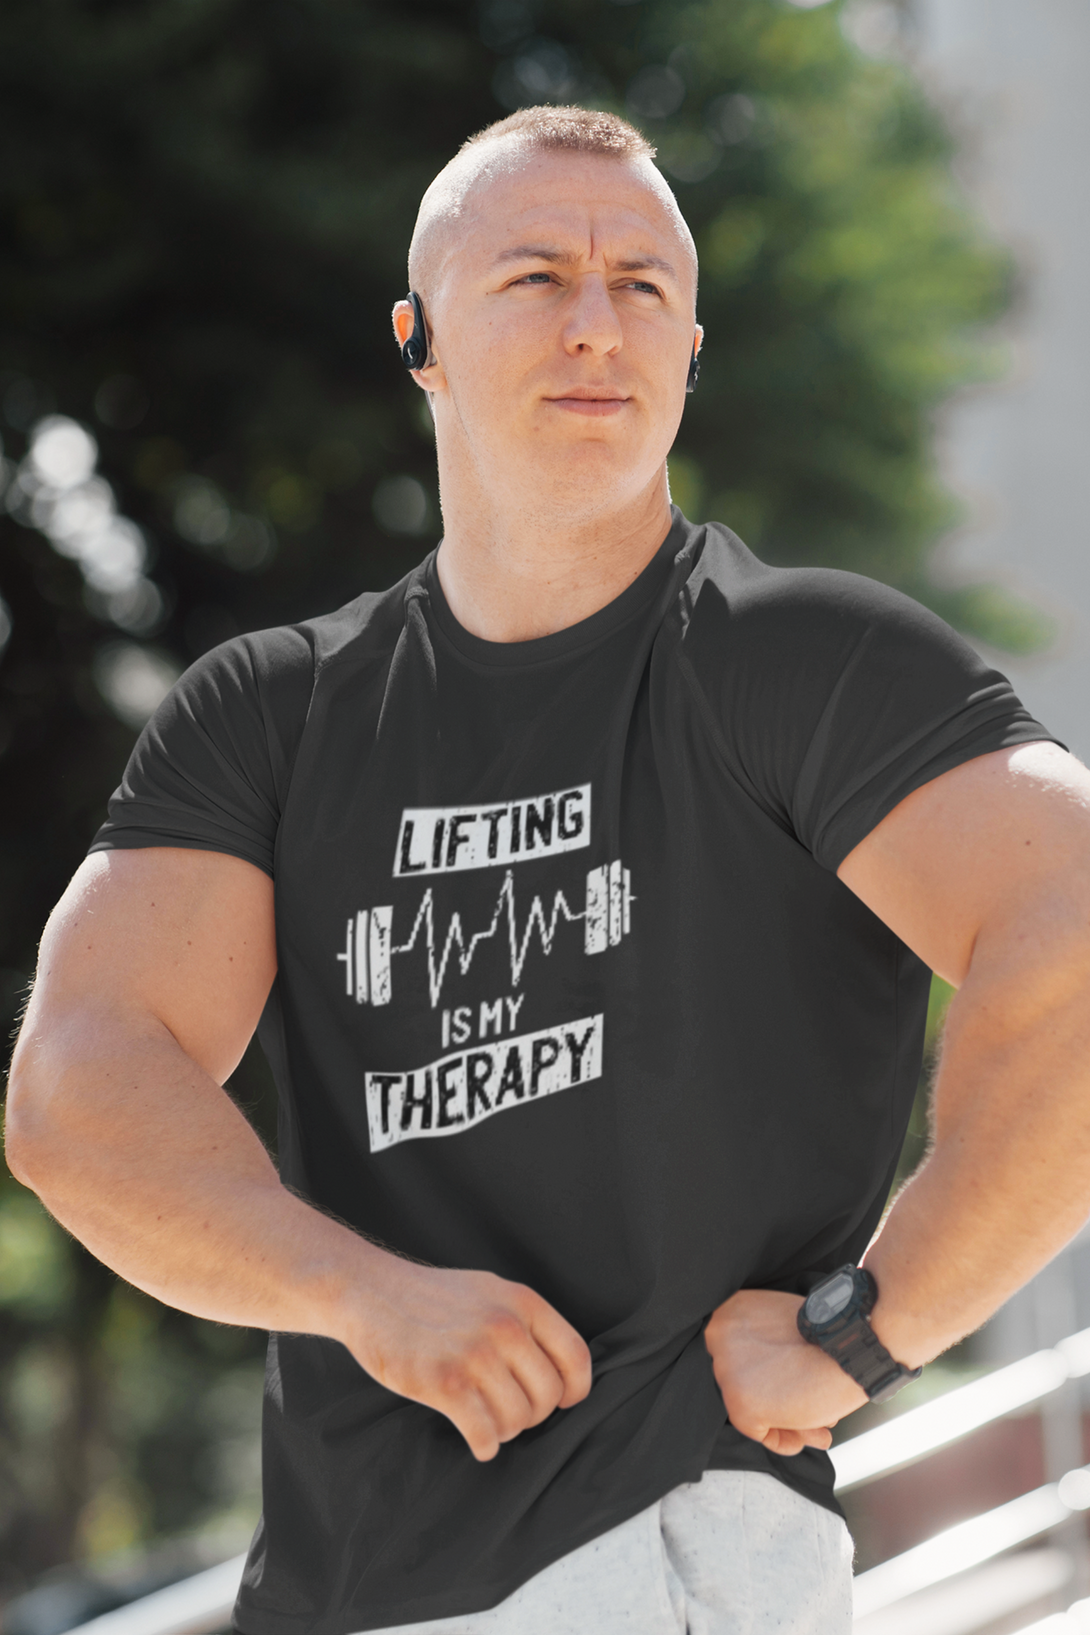 Lifting Is My Therapy Printed T-Shirt For Men - WowWaves - 4